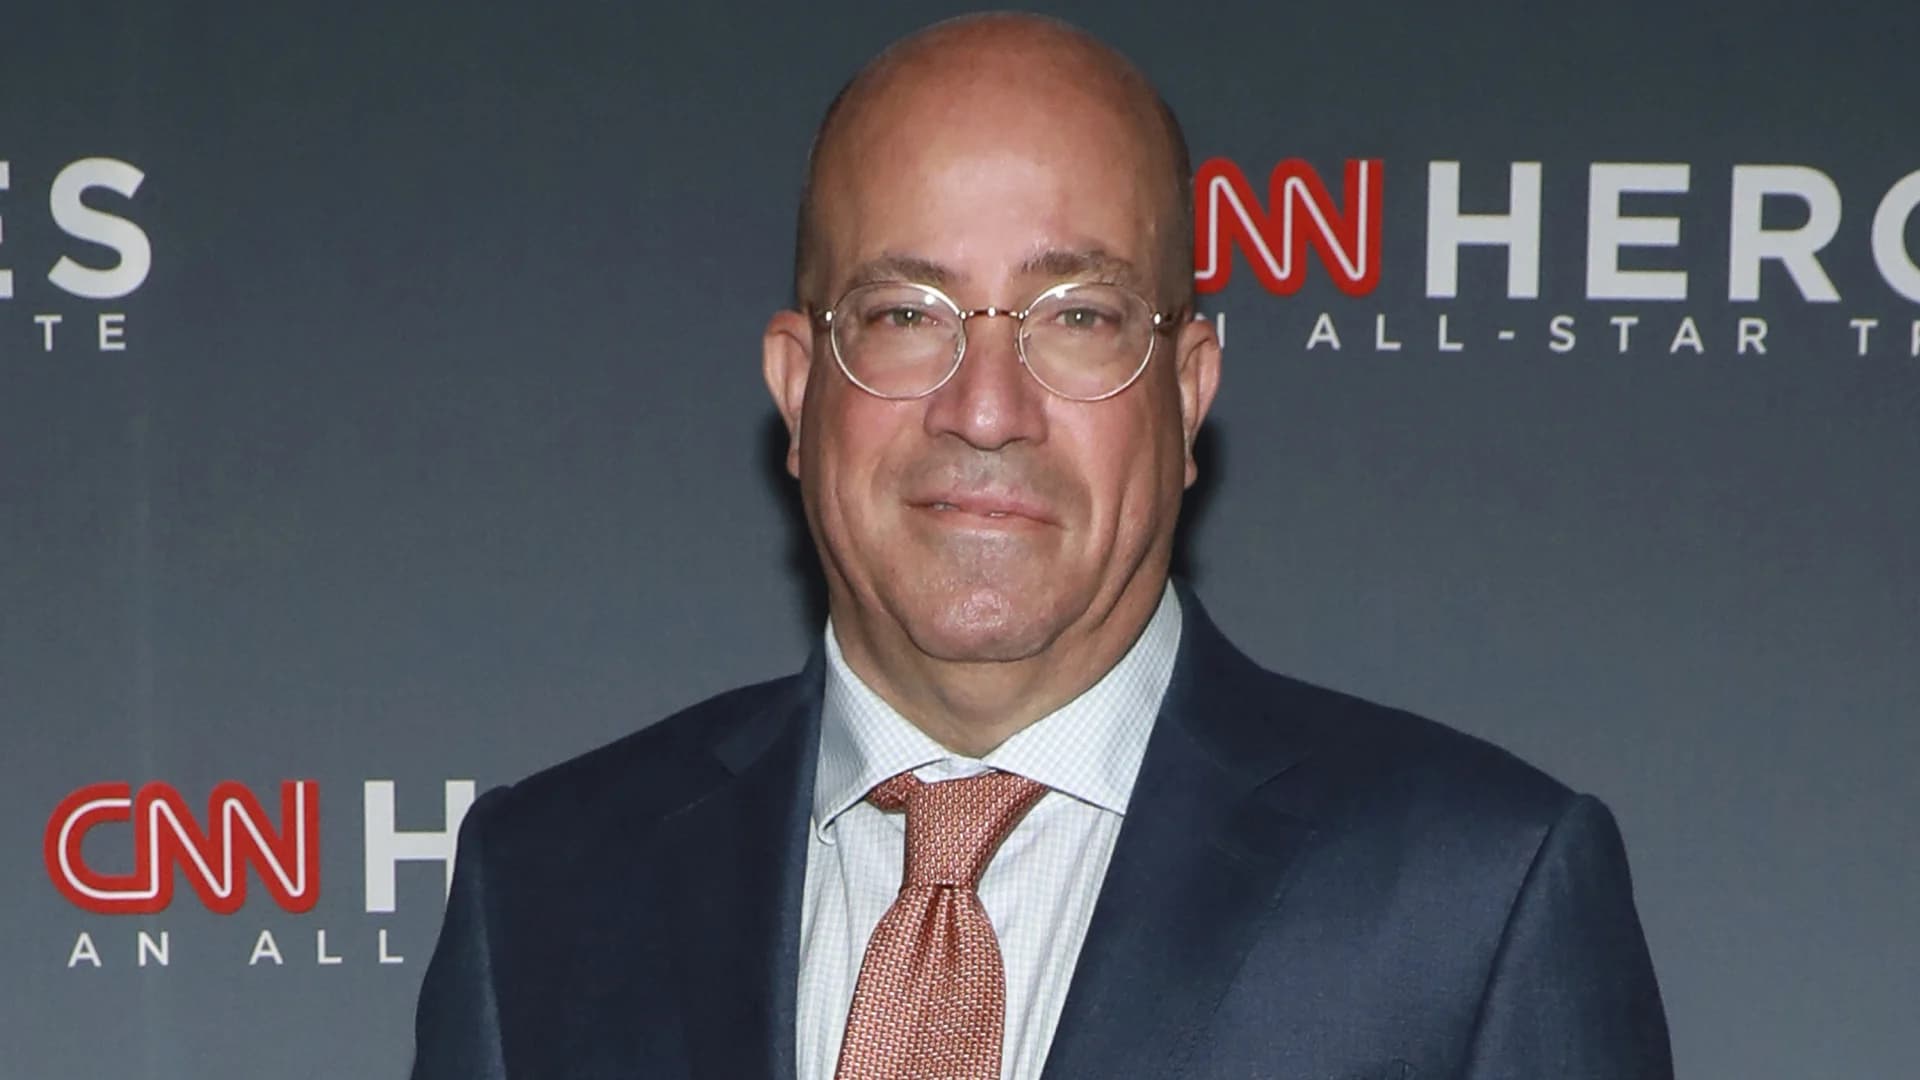 CNN's Zucker resigns after relationship with co-worker